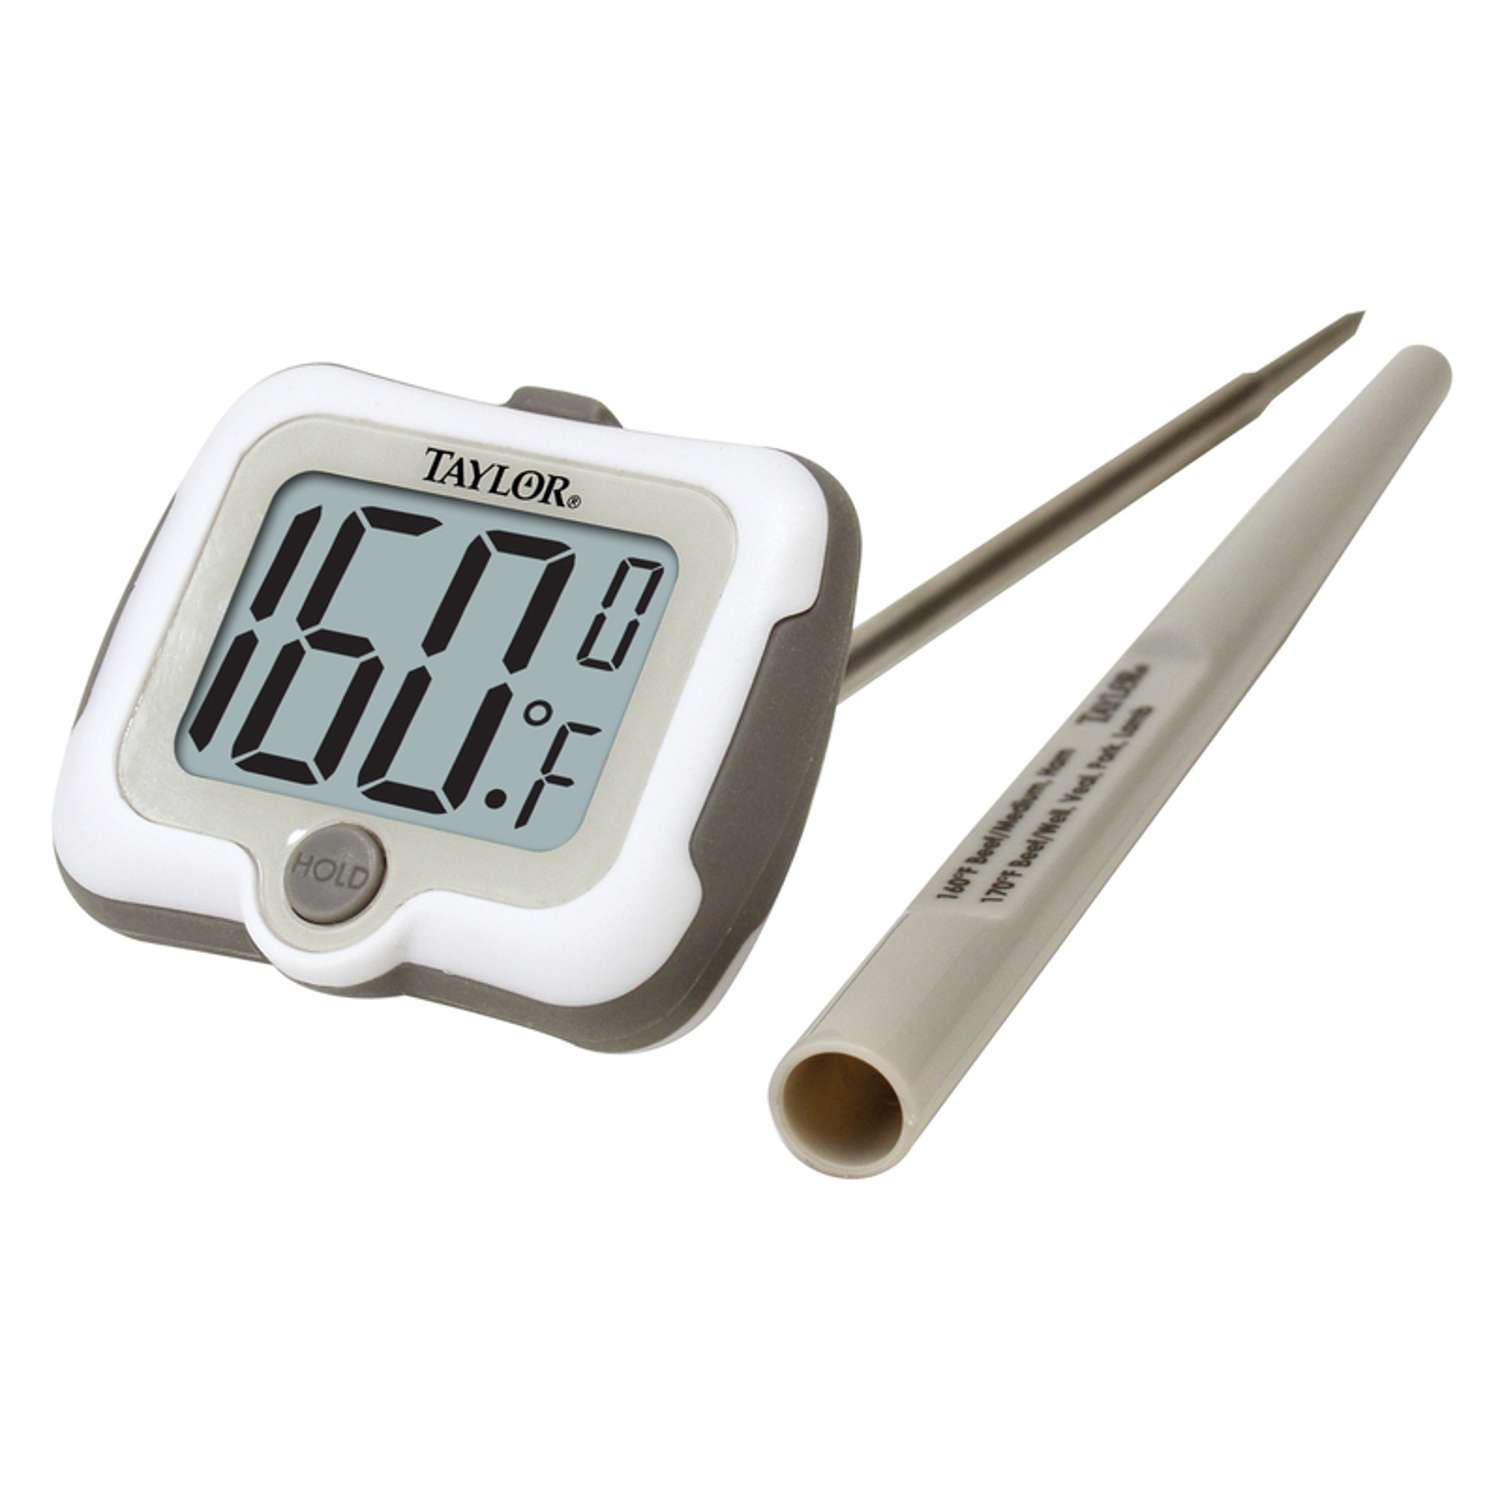 Taylor Stainless Steel Digital Folding Thermometer